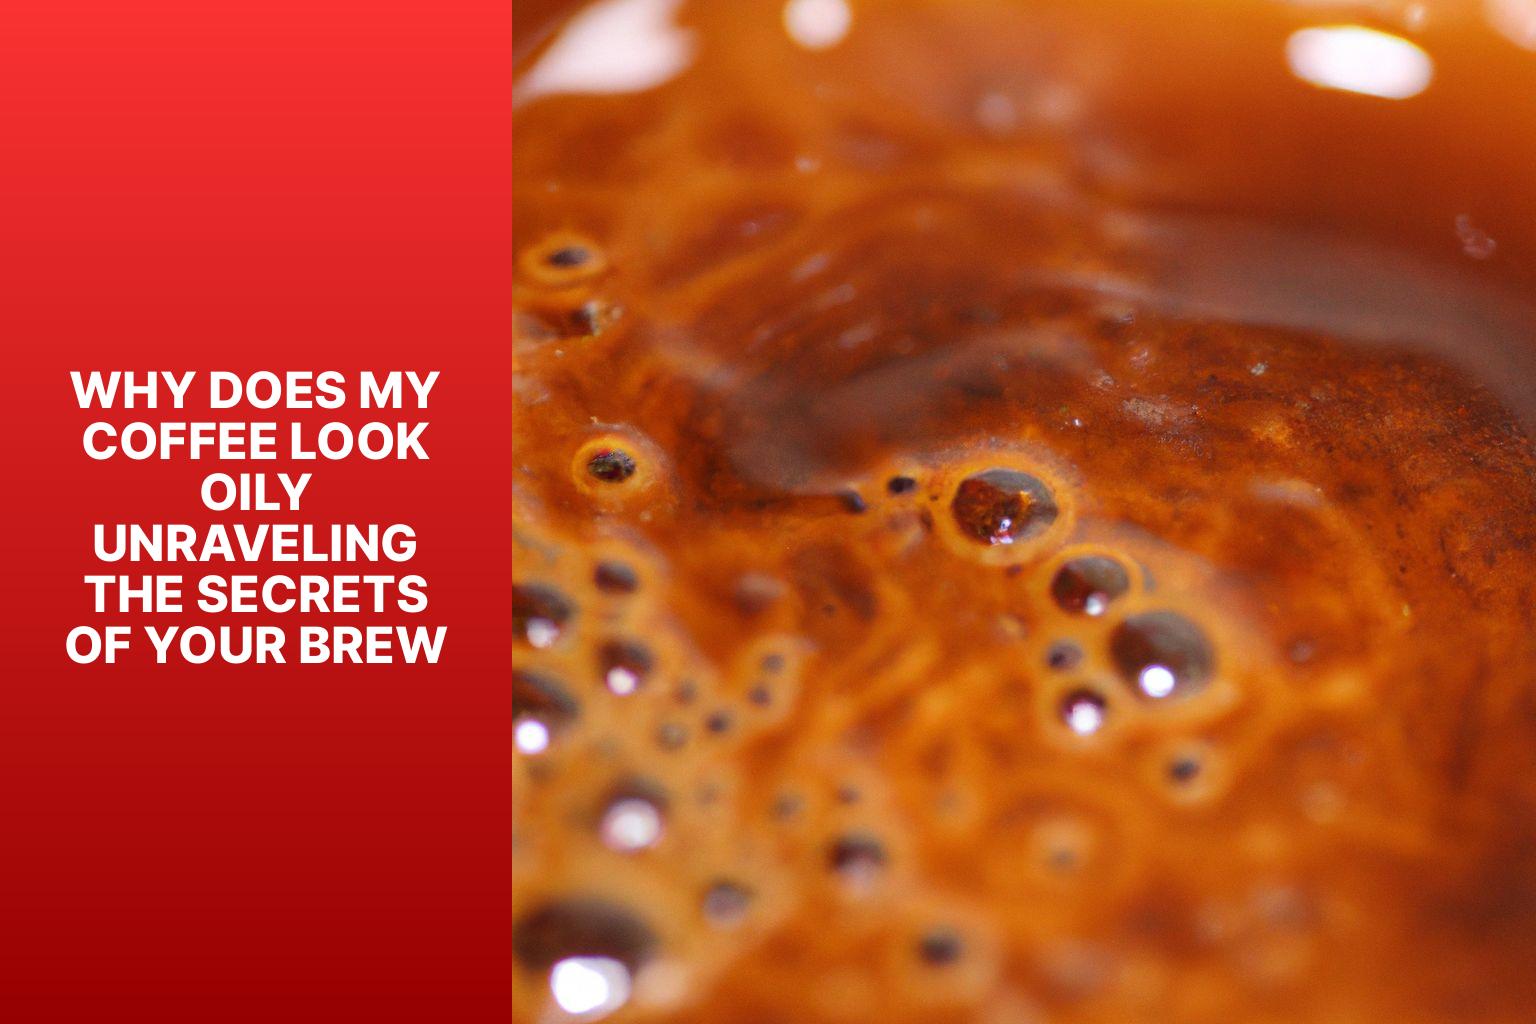 Why Does My Coffee Look Oily? Unraveling the Secrets of Your Brew